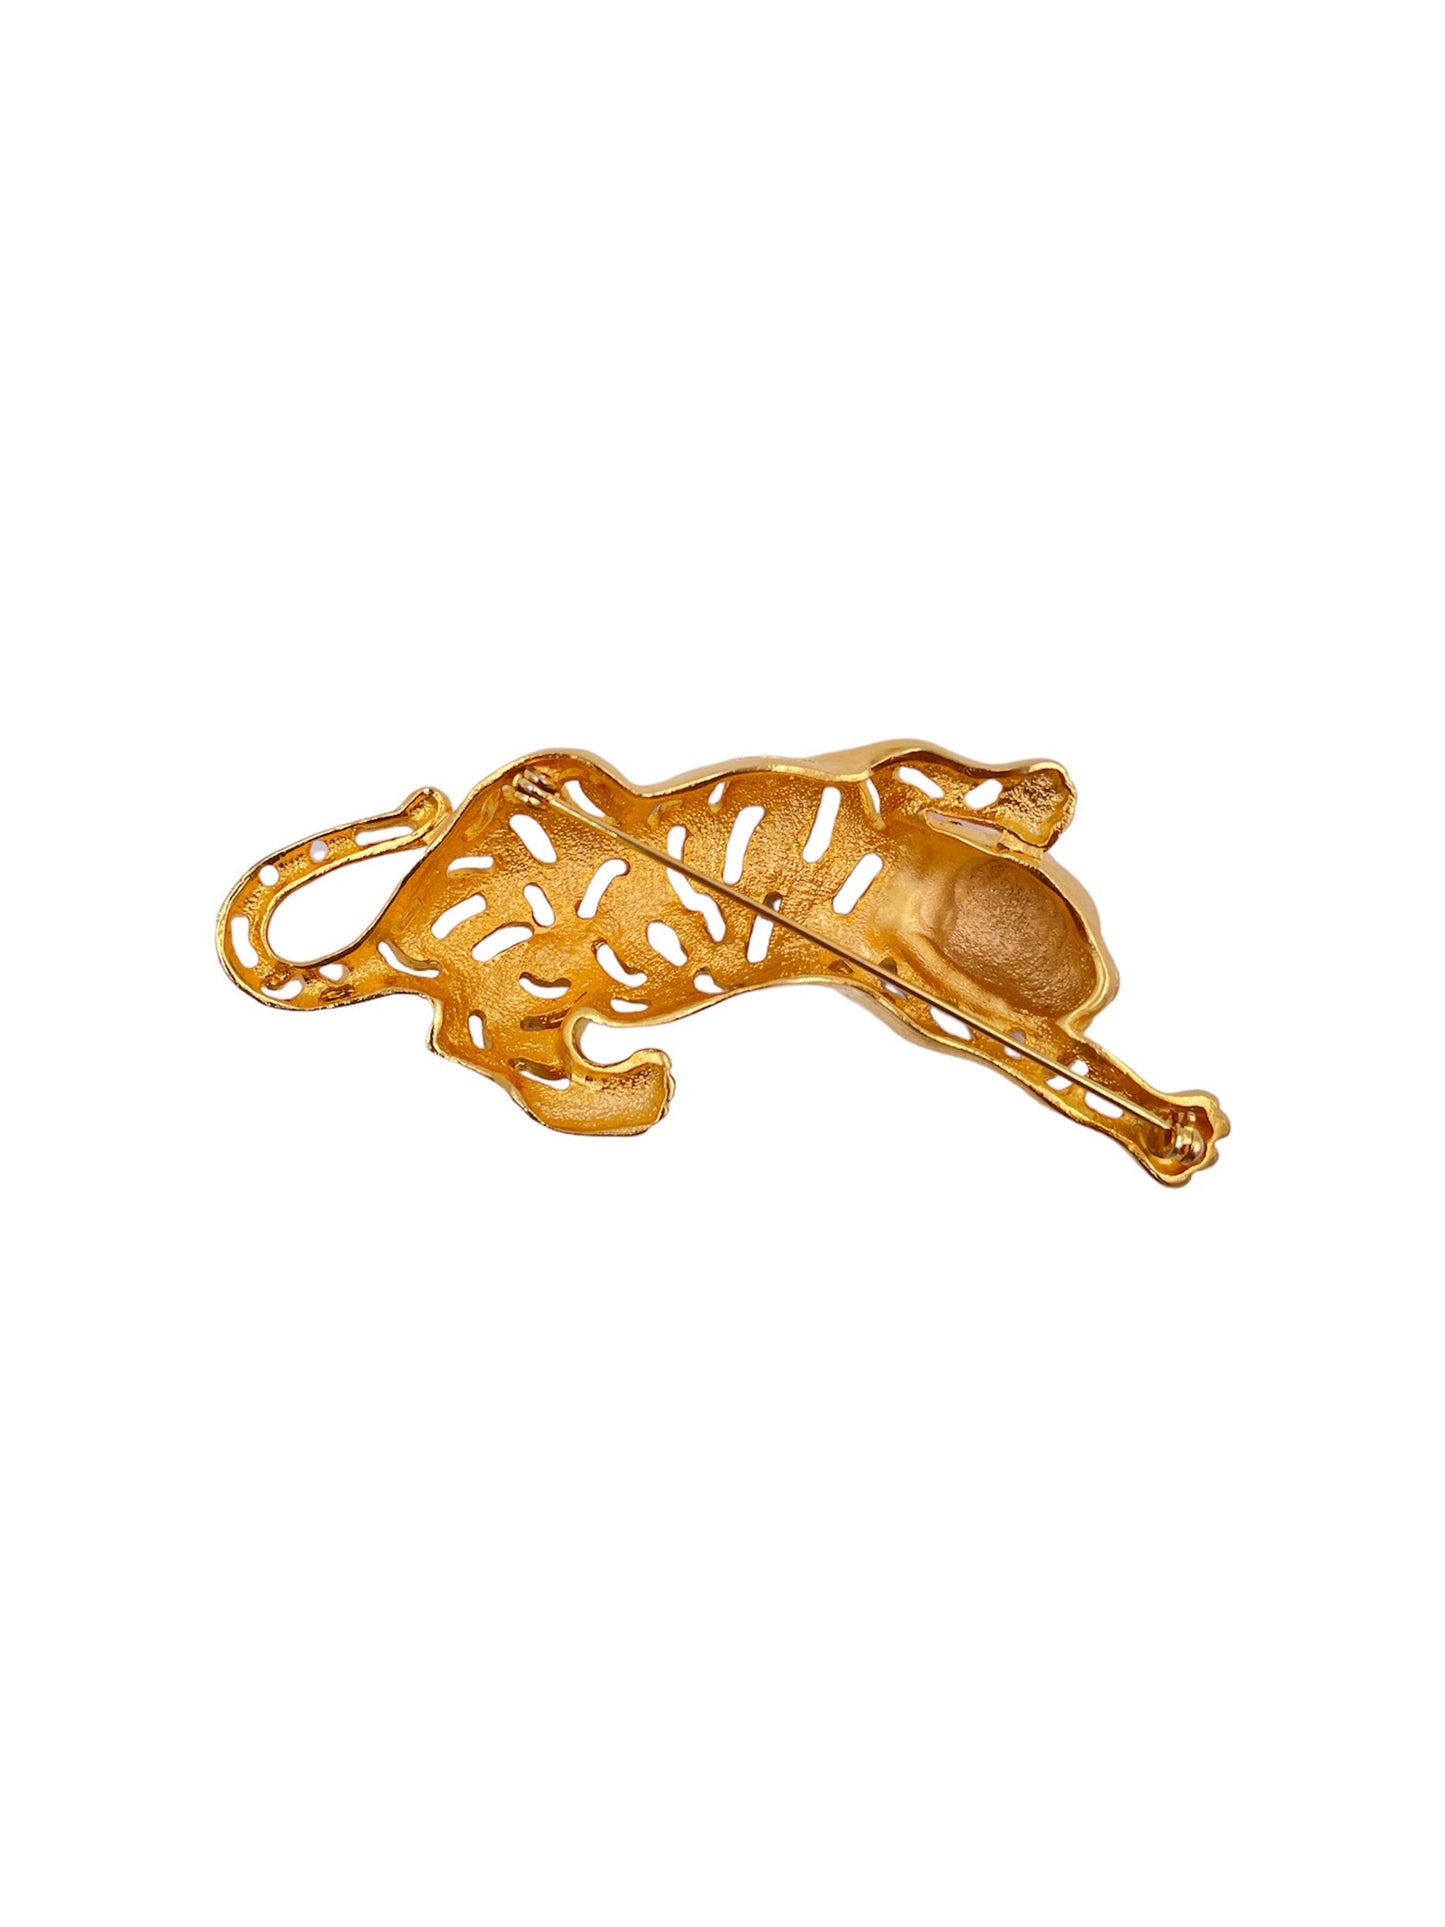 Gold Panther Brooch